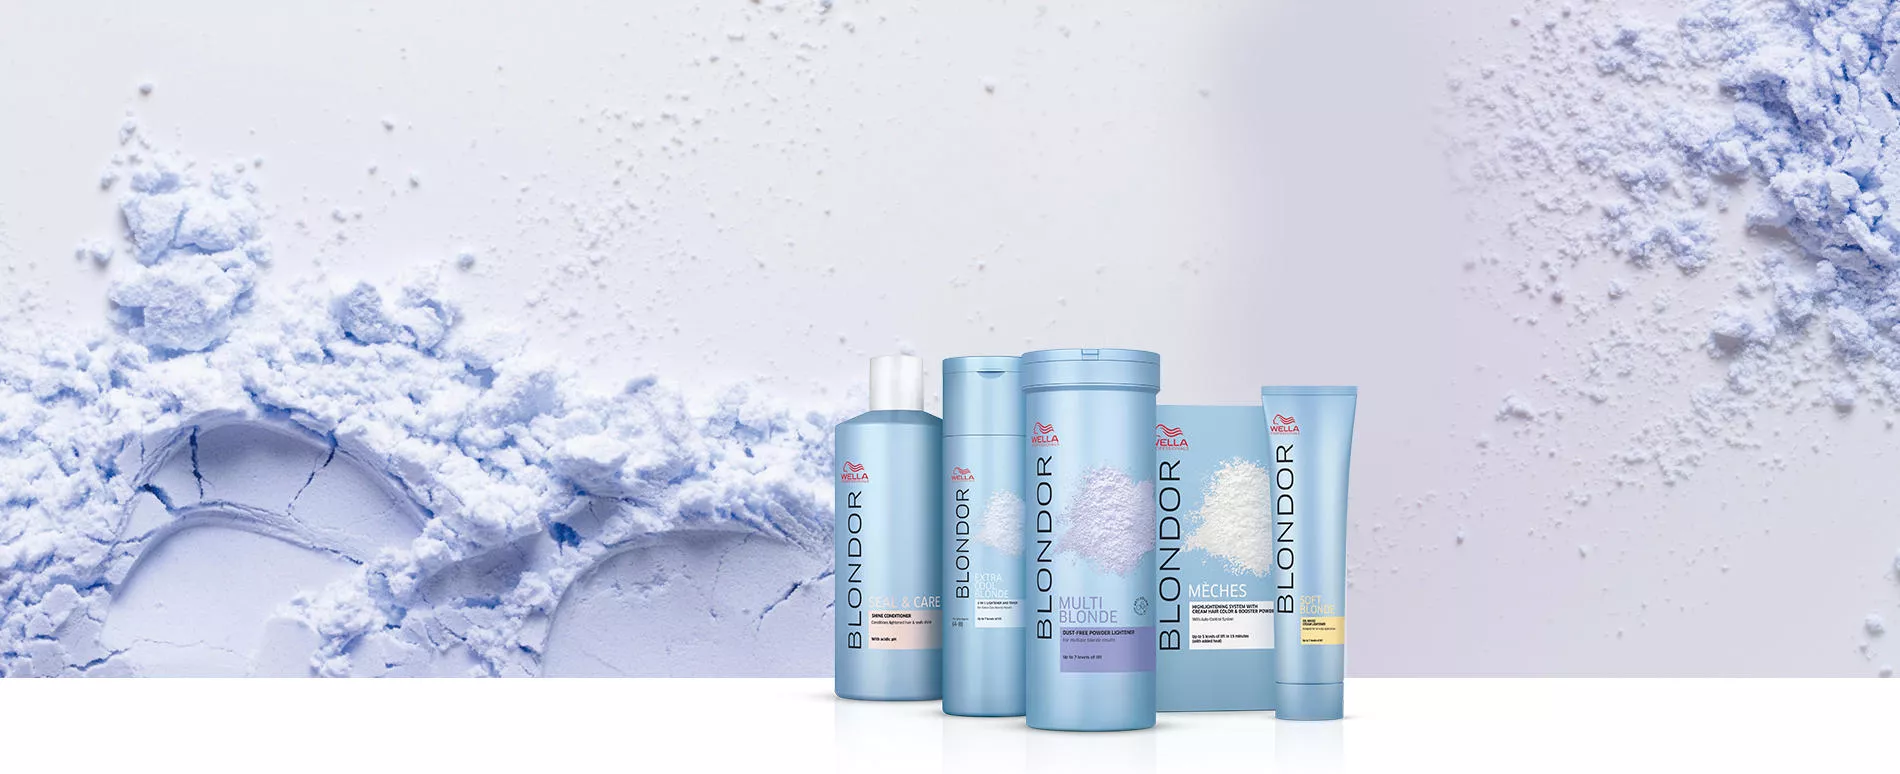 Range of Wella Professionals Blondor products, with white powder sprinkled in the background